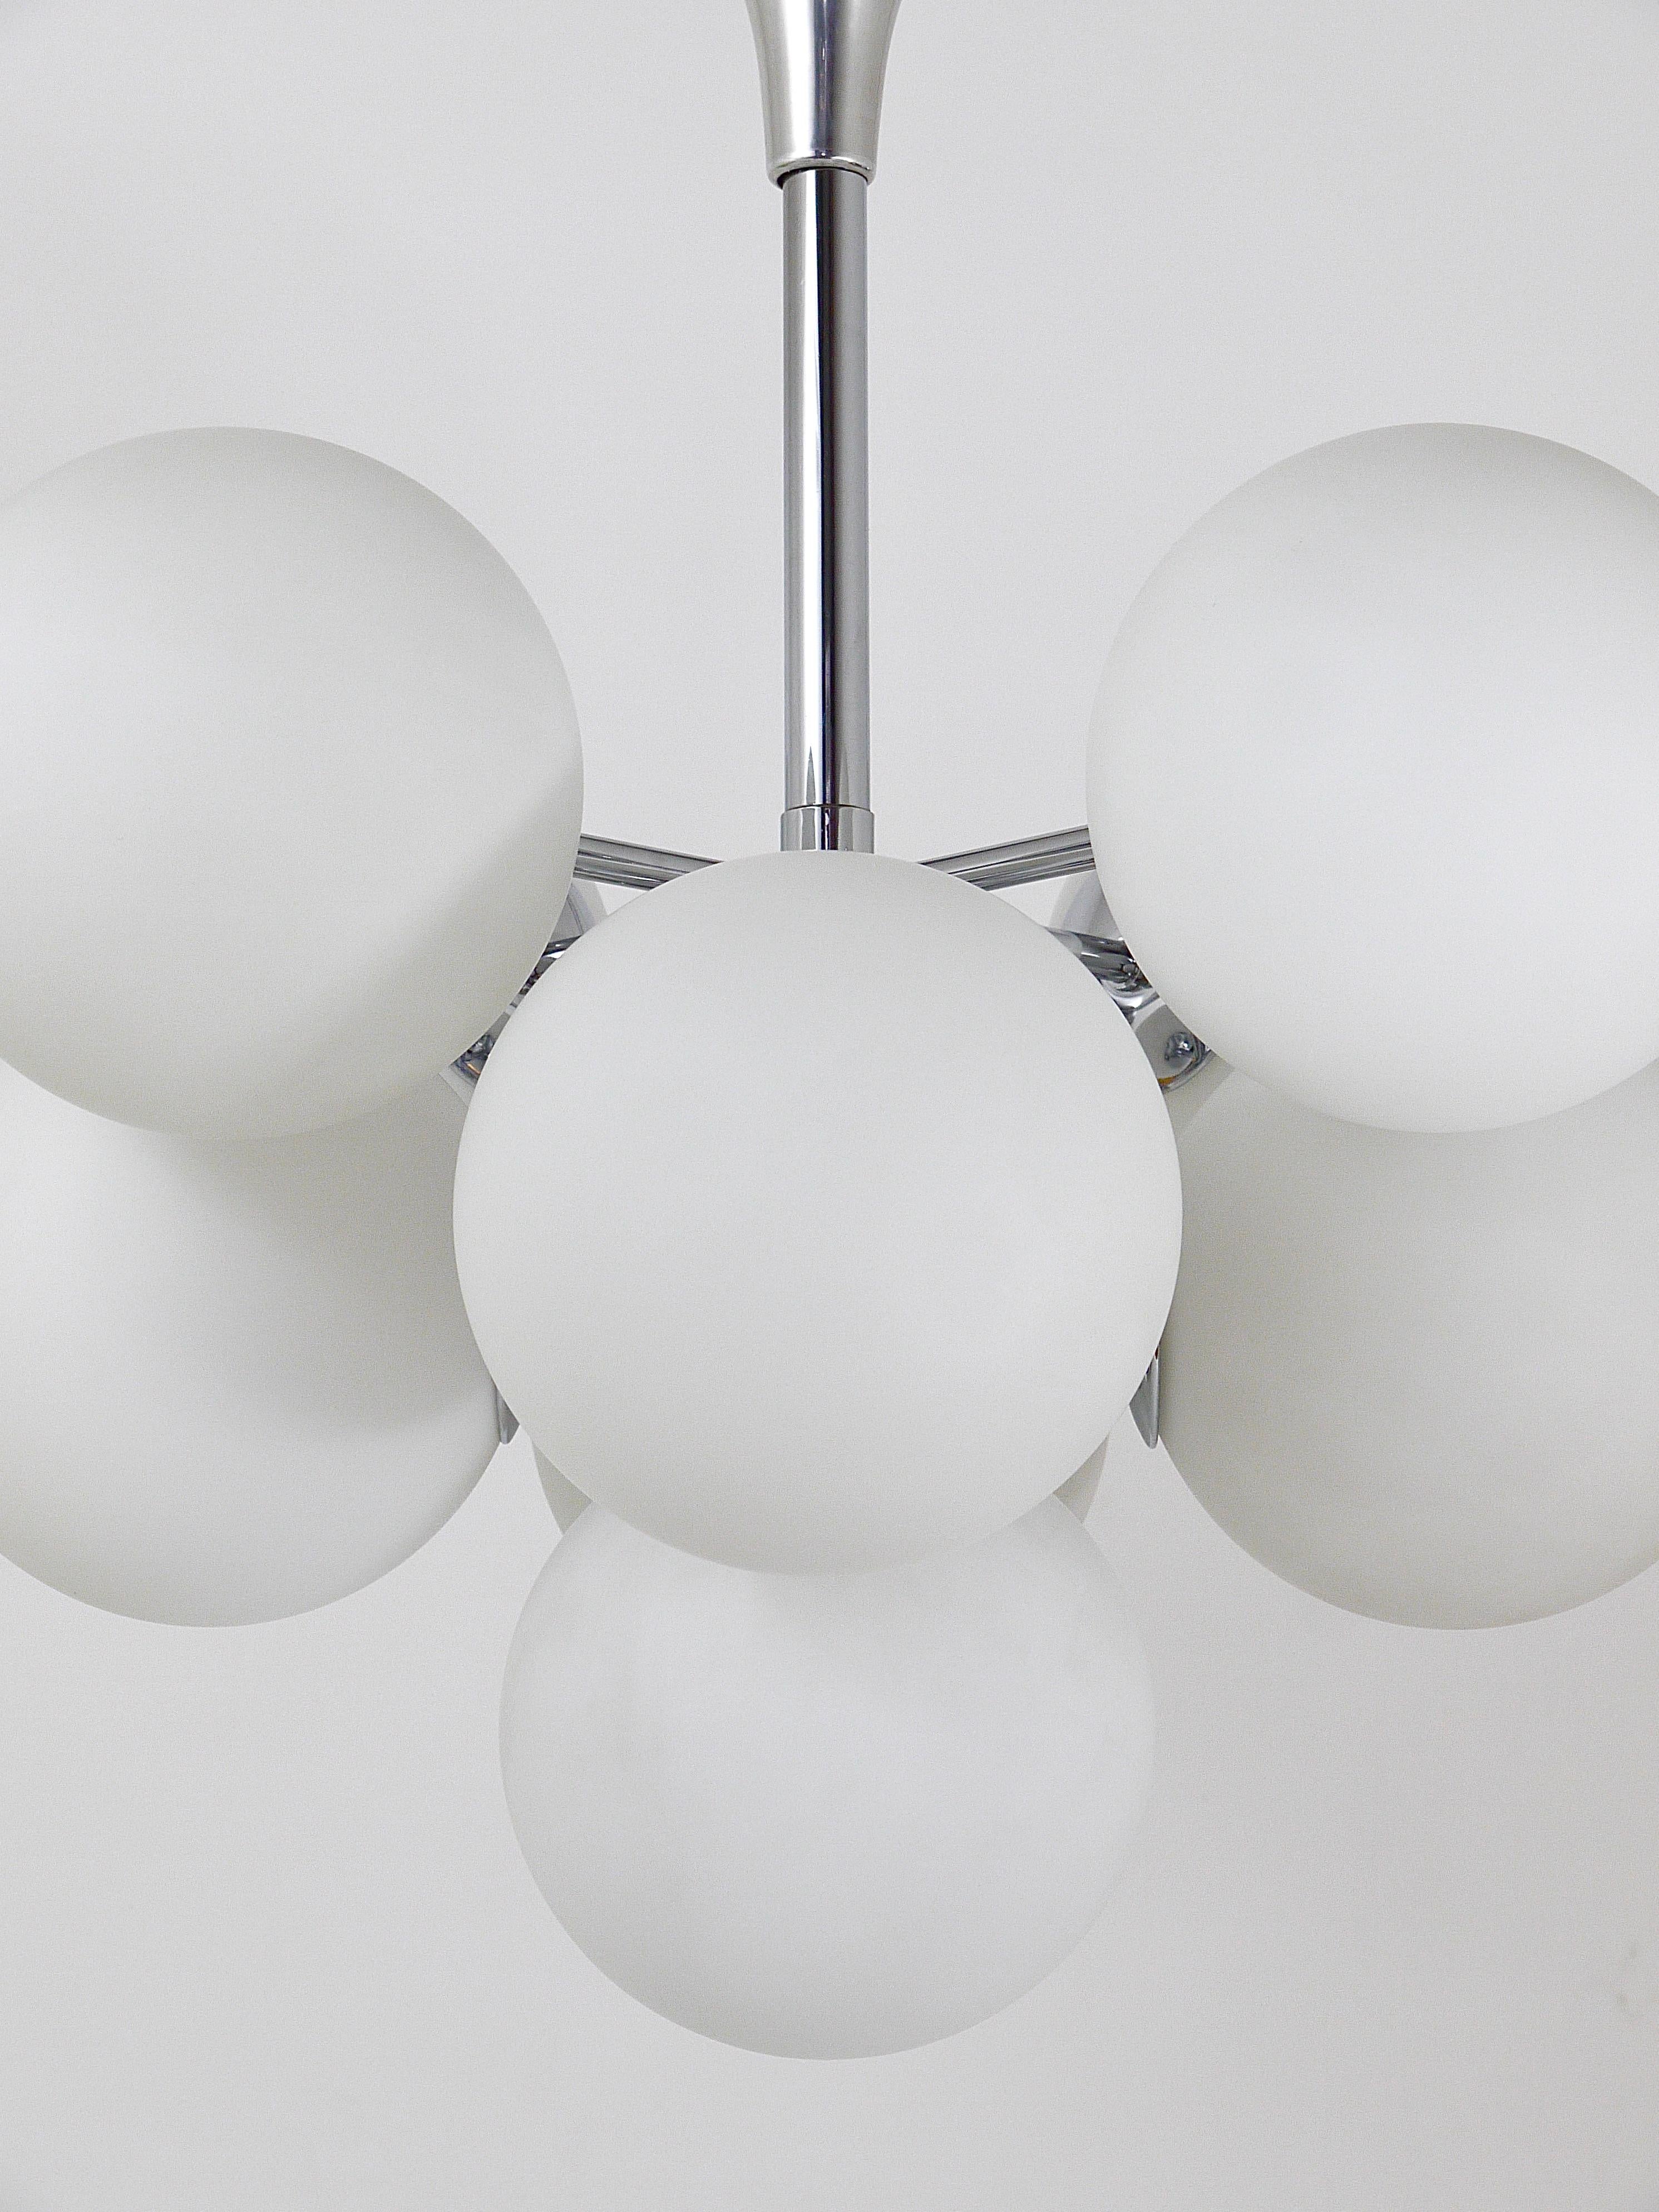 Chromed Atomic Chandelier with White Glass Globes, Temde, Switzerland For Sale 7